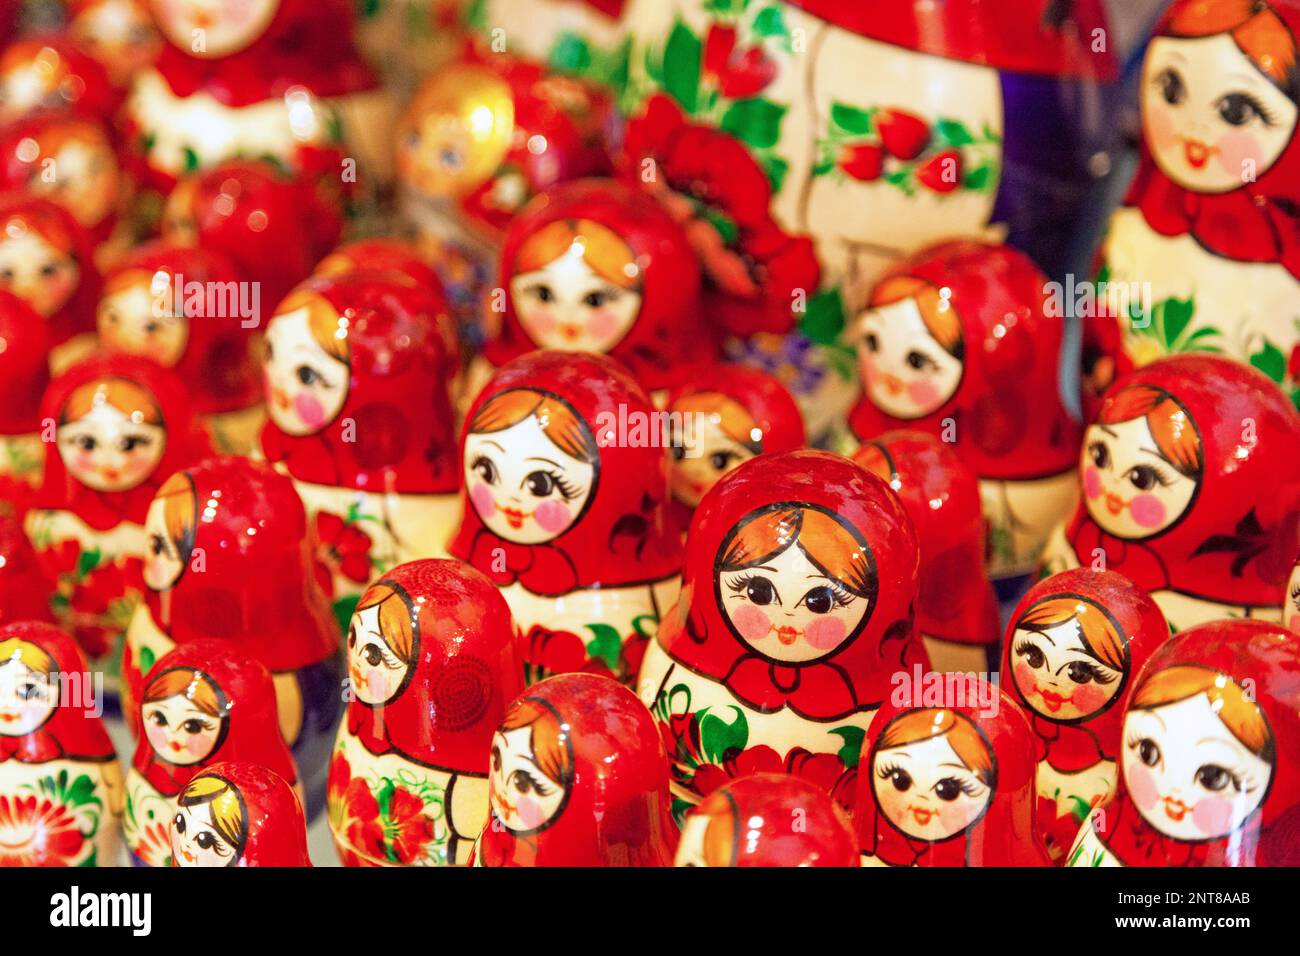 Matryoshka dolls for sale in the retail display of a gift shop. Stock Photo